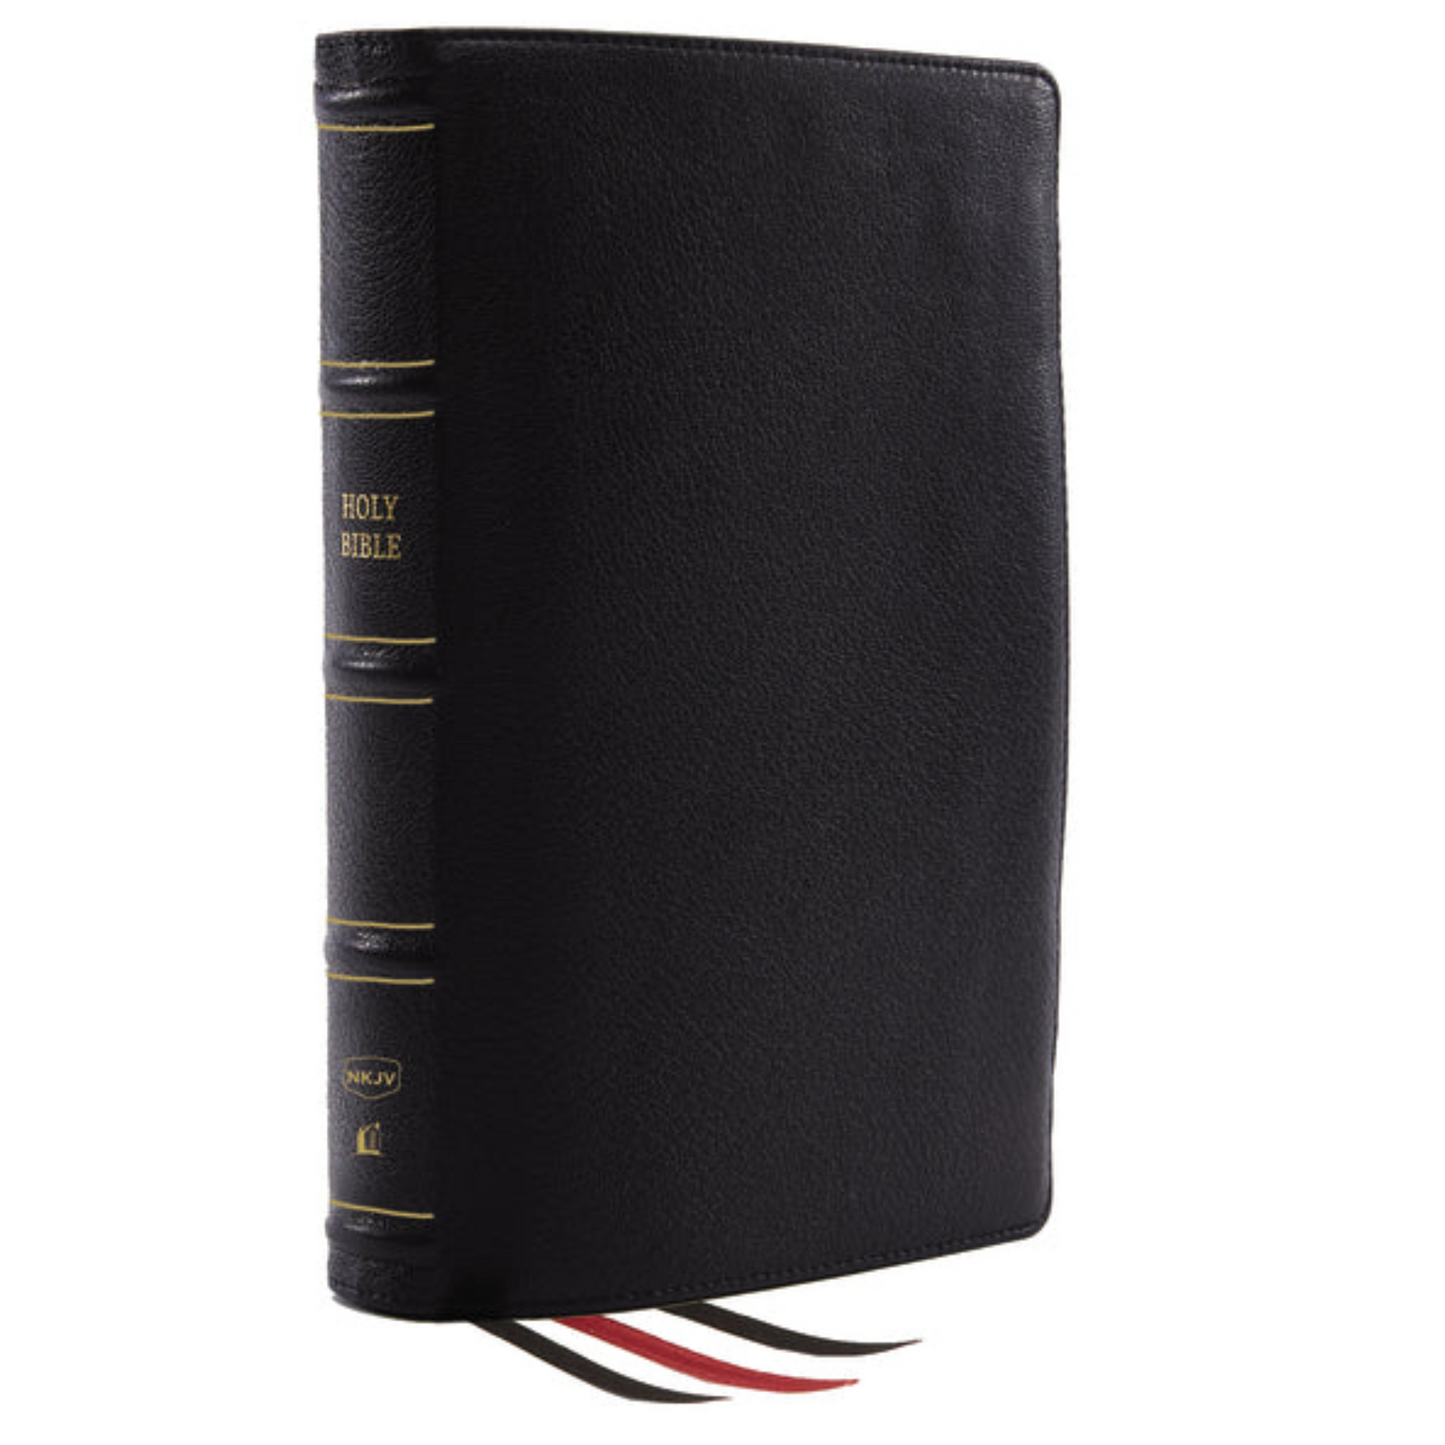 NKJV, Reference Bible, Classic Verse-by-Verse, Center-Column, Genuine Leather, Black